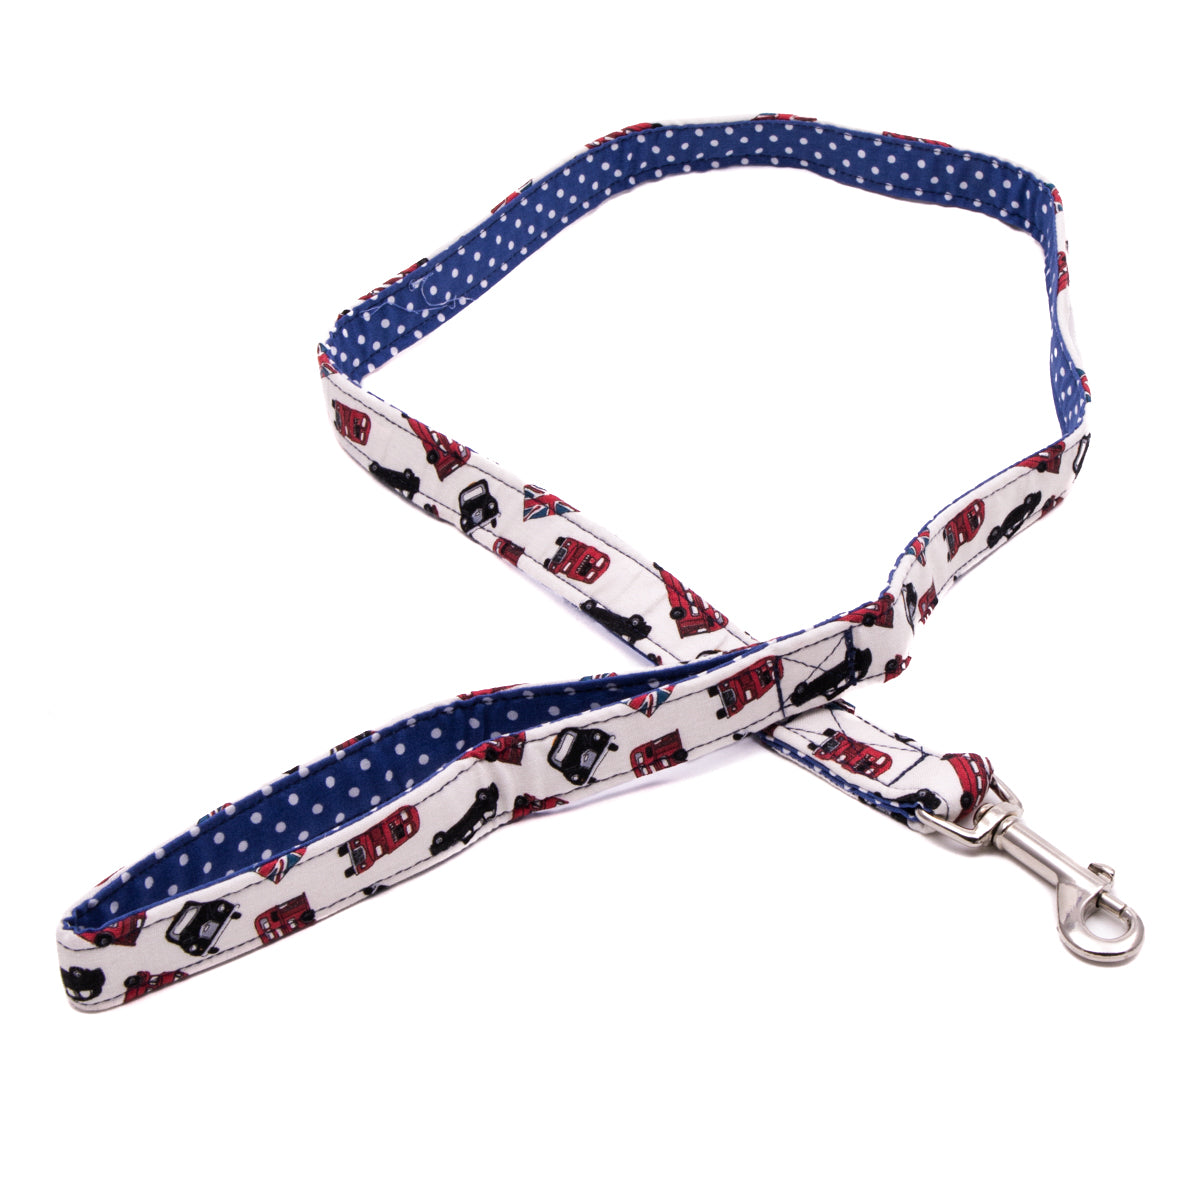 BlossomCo London Style Dog Lead 2